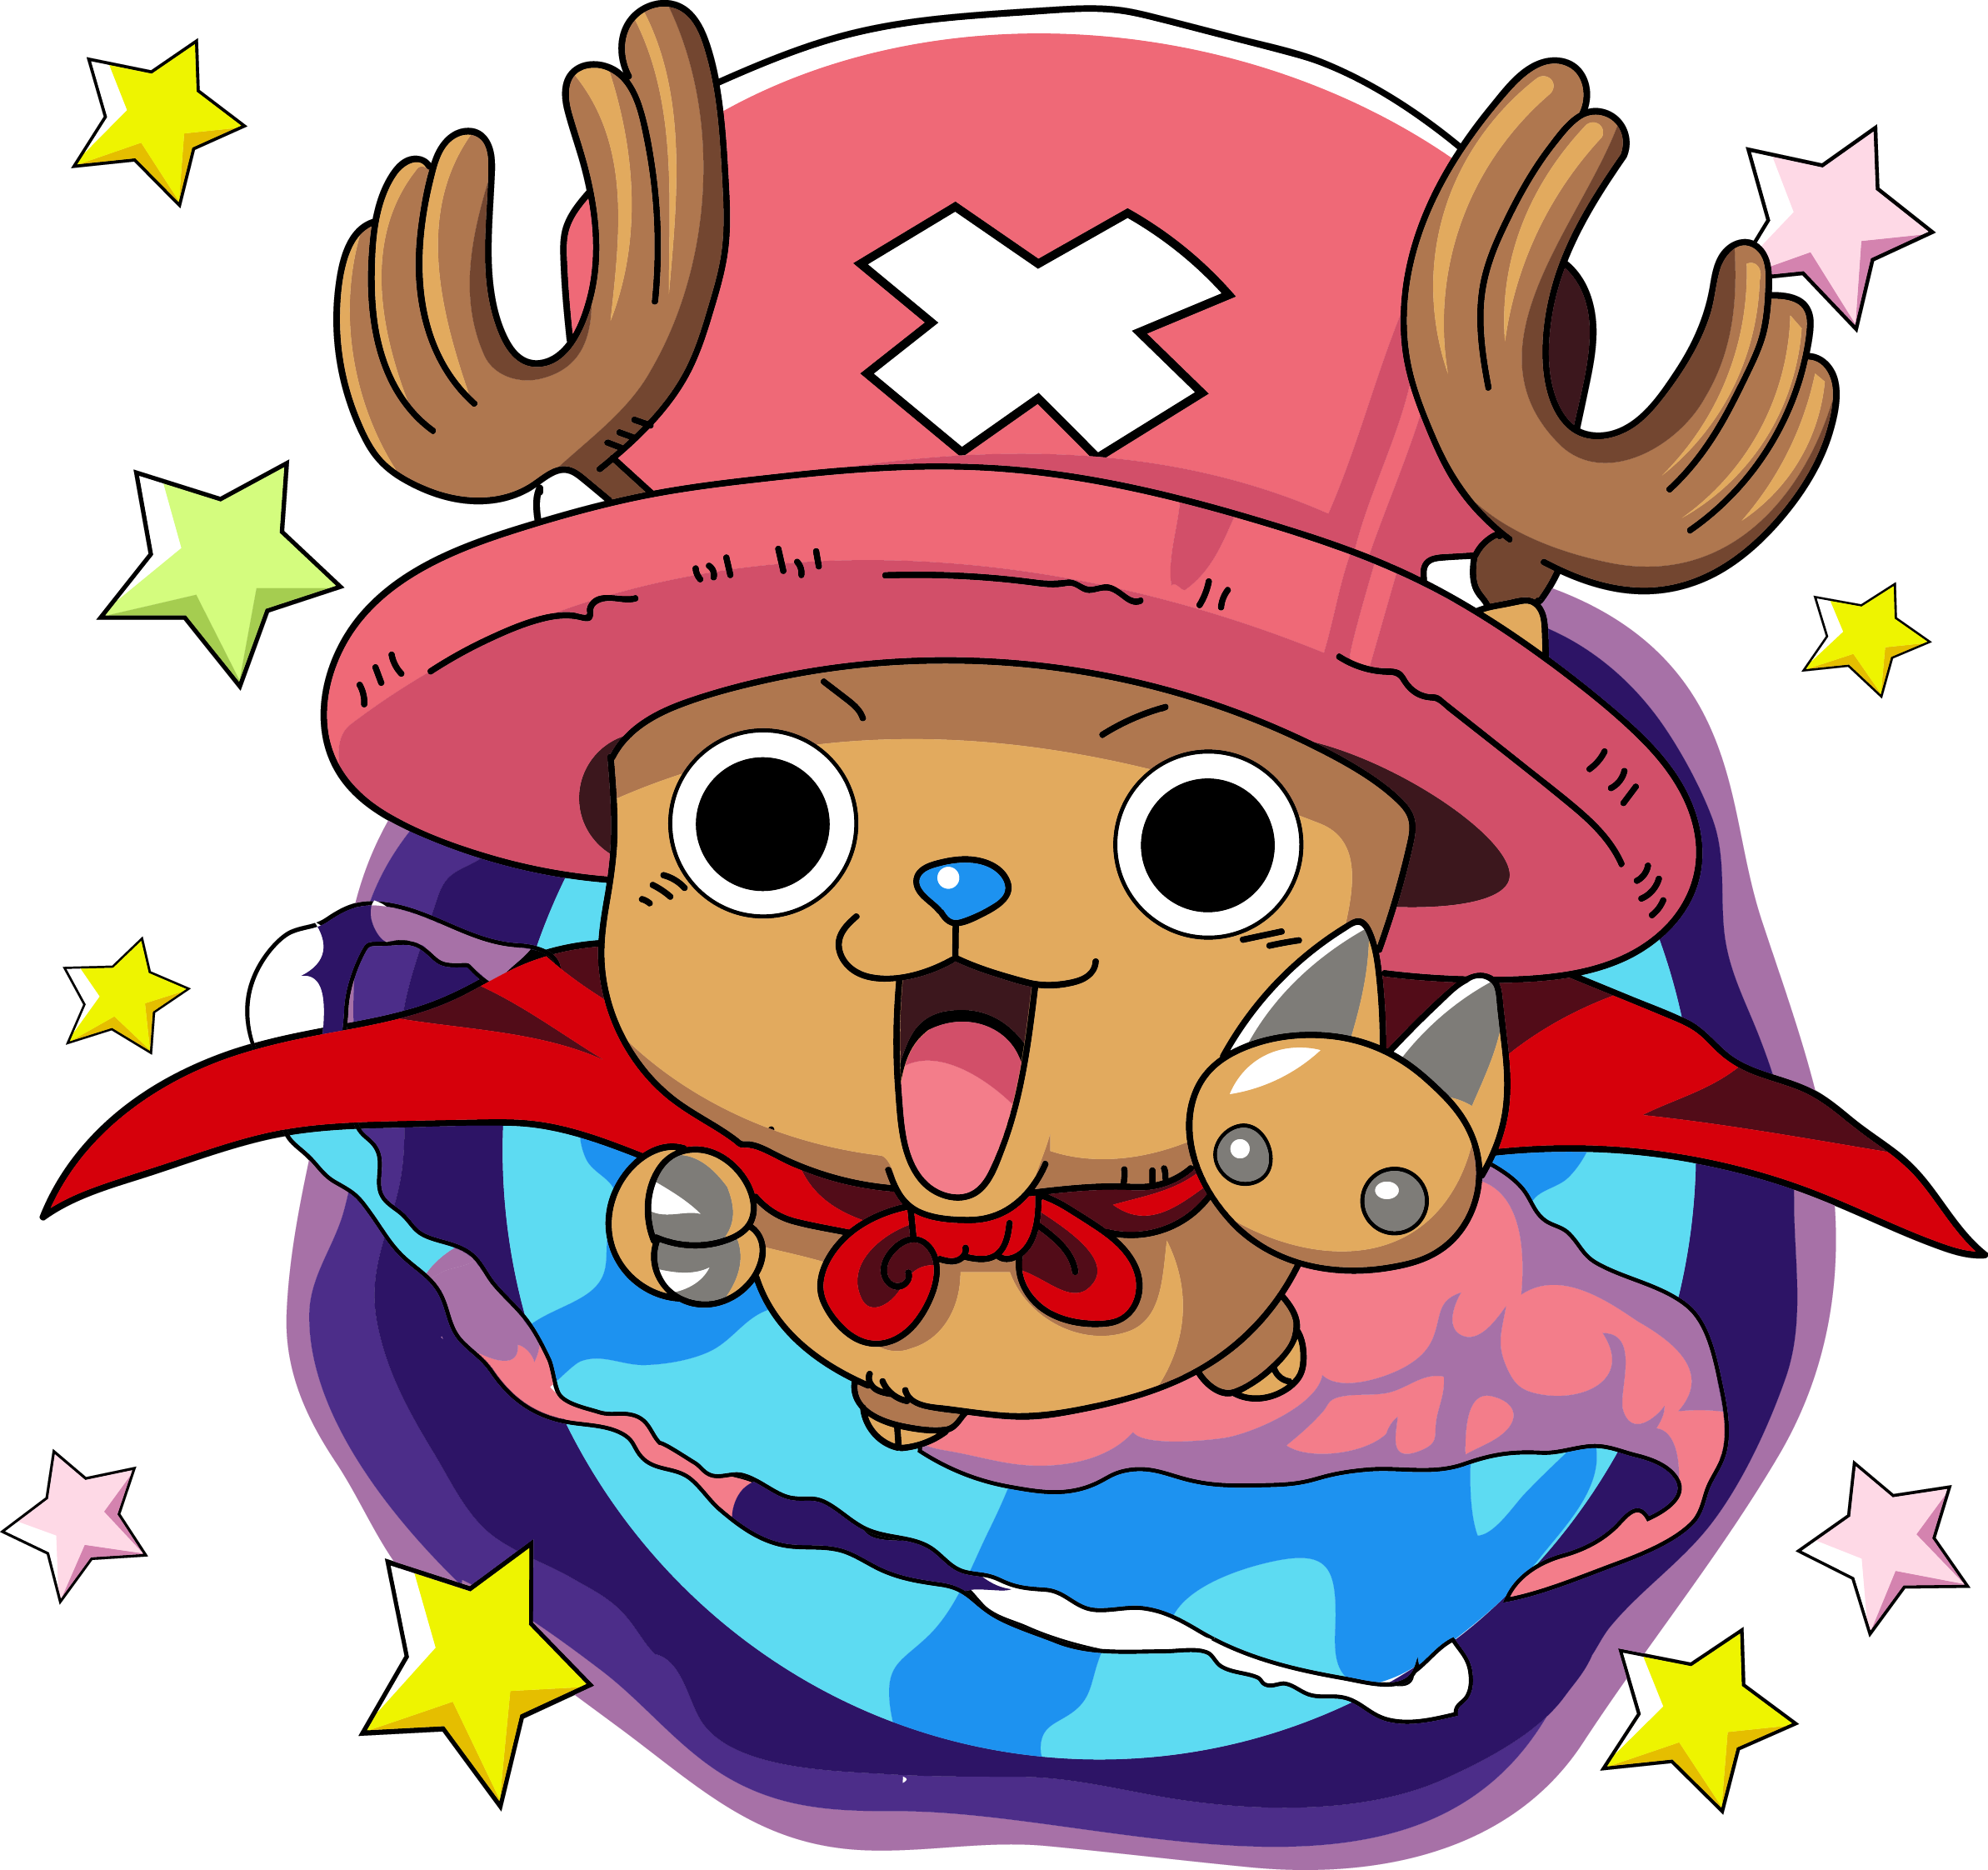 Cartoon character with a pink hat and horns.